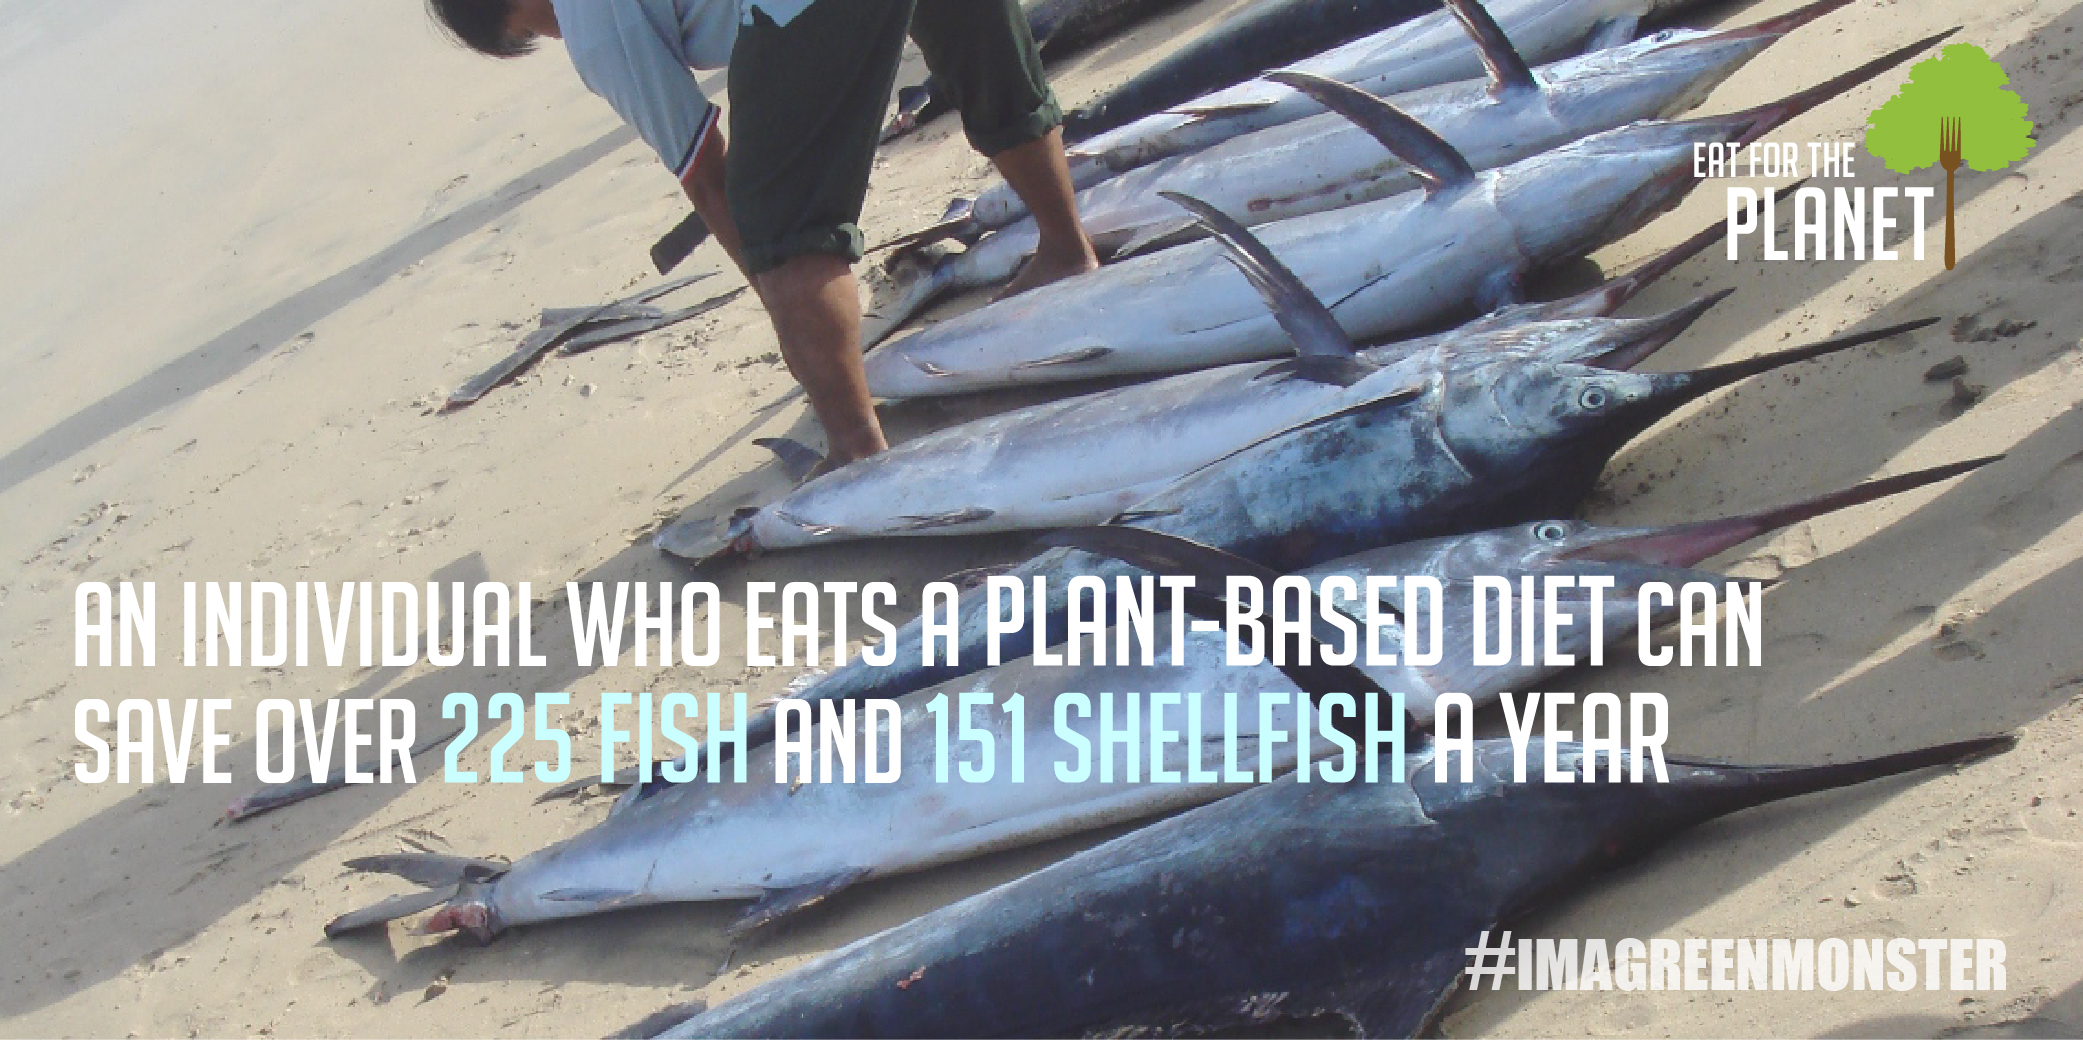 If You Took Seafood Out of Your Diet, How Would it Really Help the Planet?